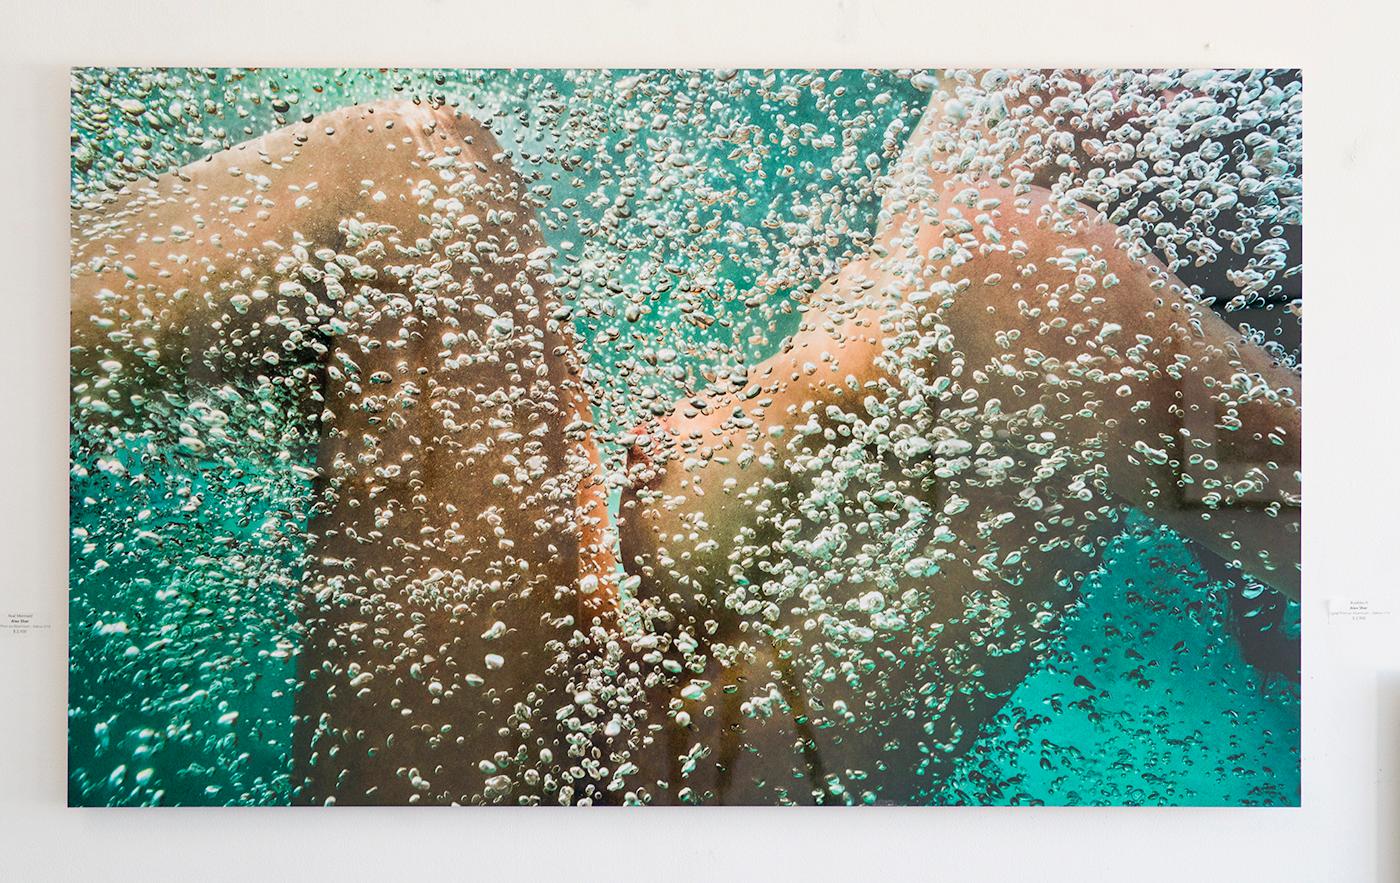 Champagne - underwater nude photograph  - print on aluminum 32